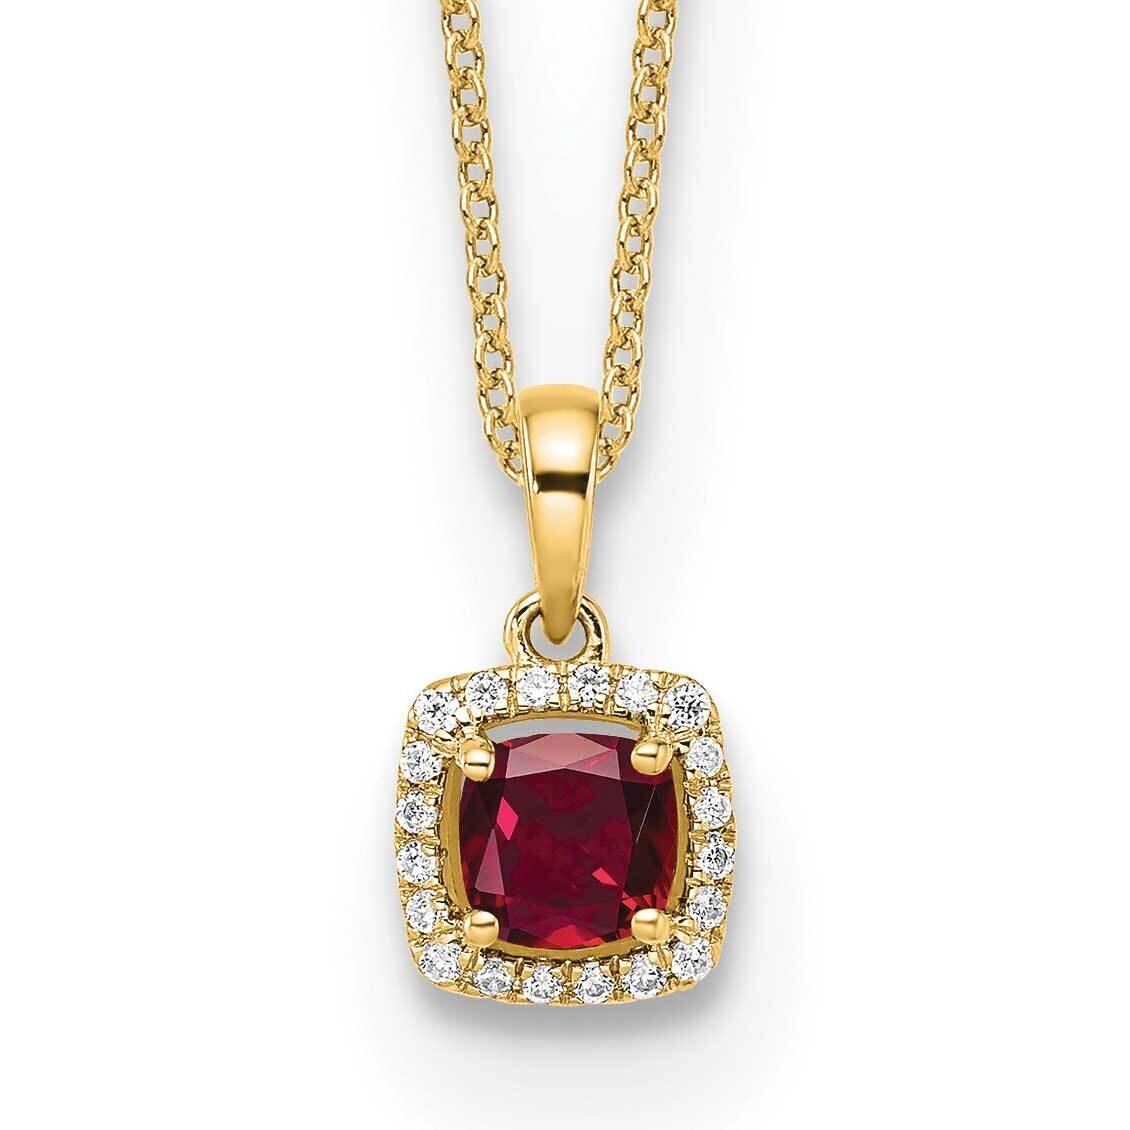 Diamond Created Ruby Pendant Necklace 14k Gold PM8582-CRU-010-YLG